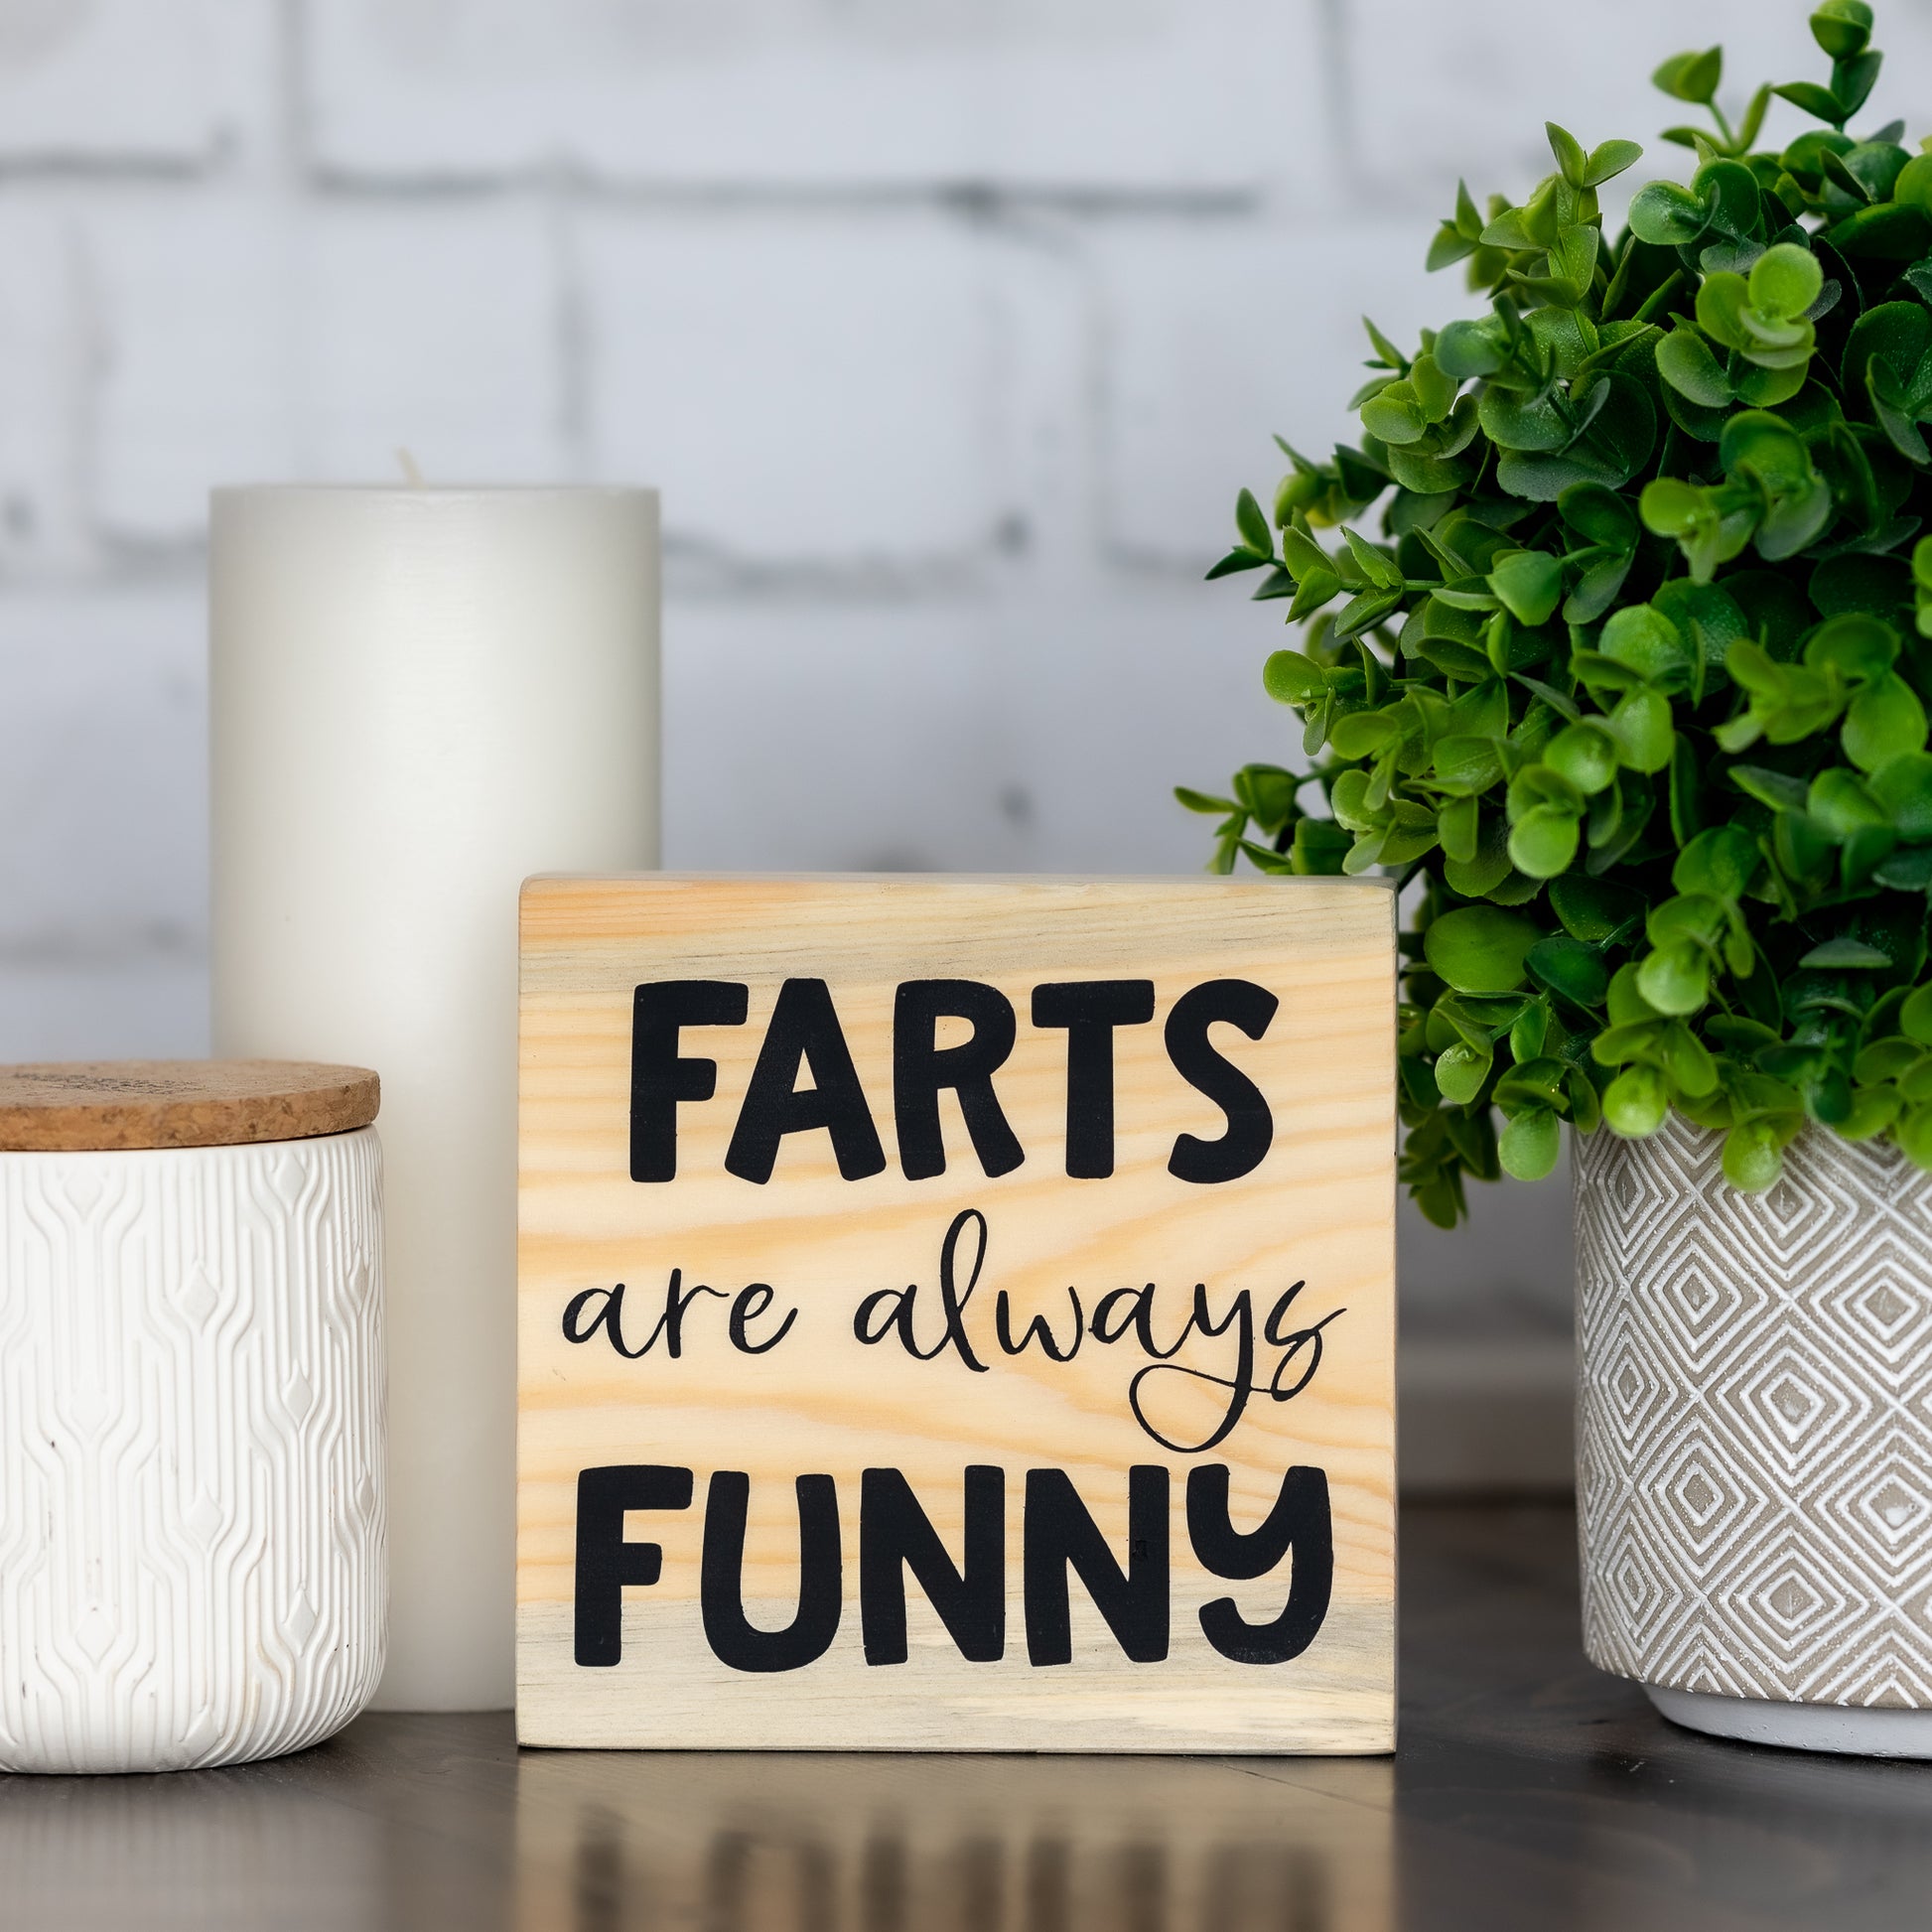 farts are always funny ~ wood sign block